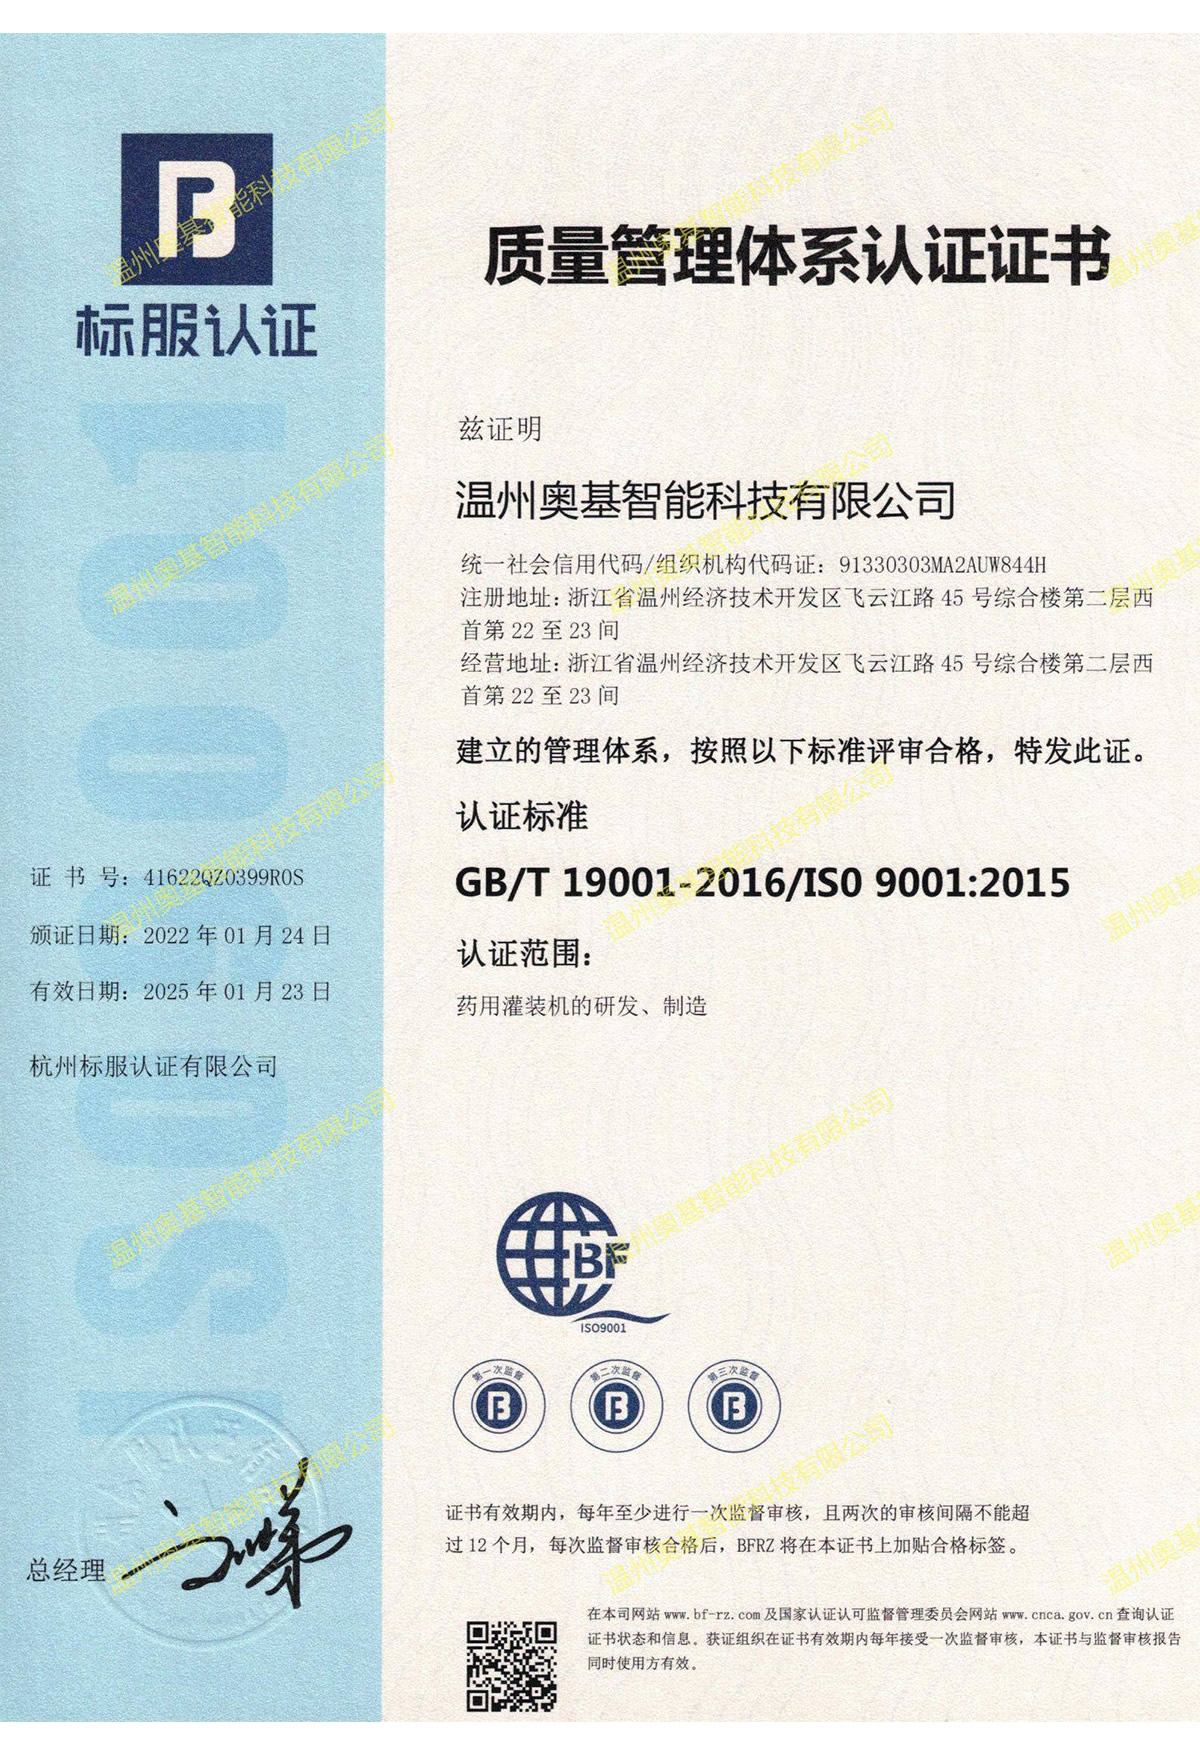 Chinese version of ISO9001